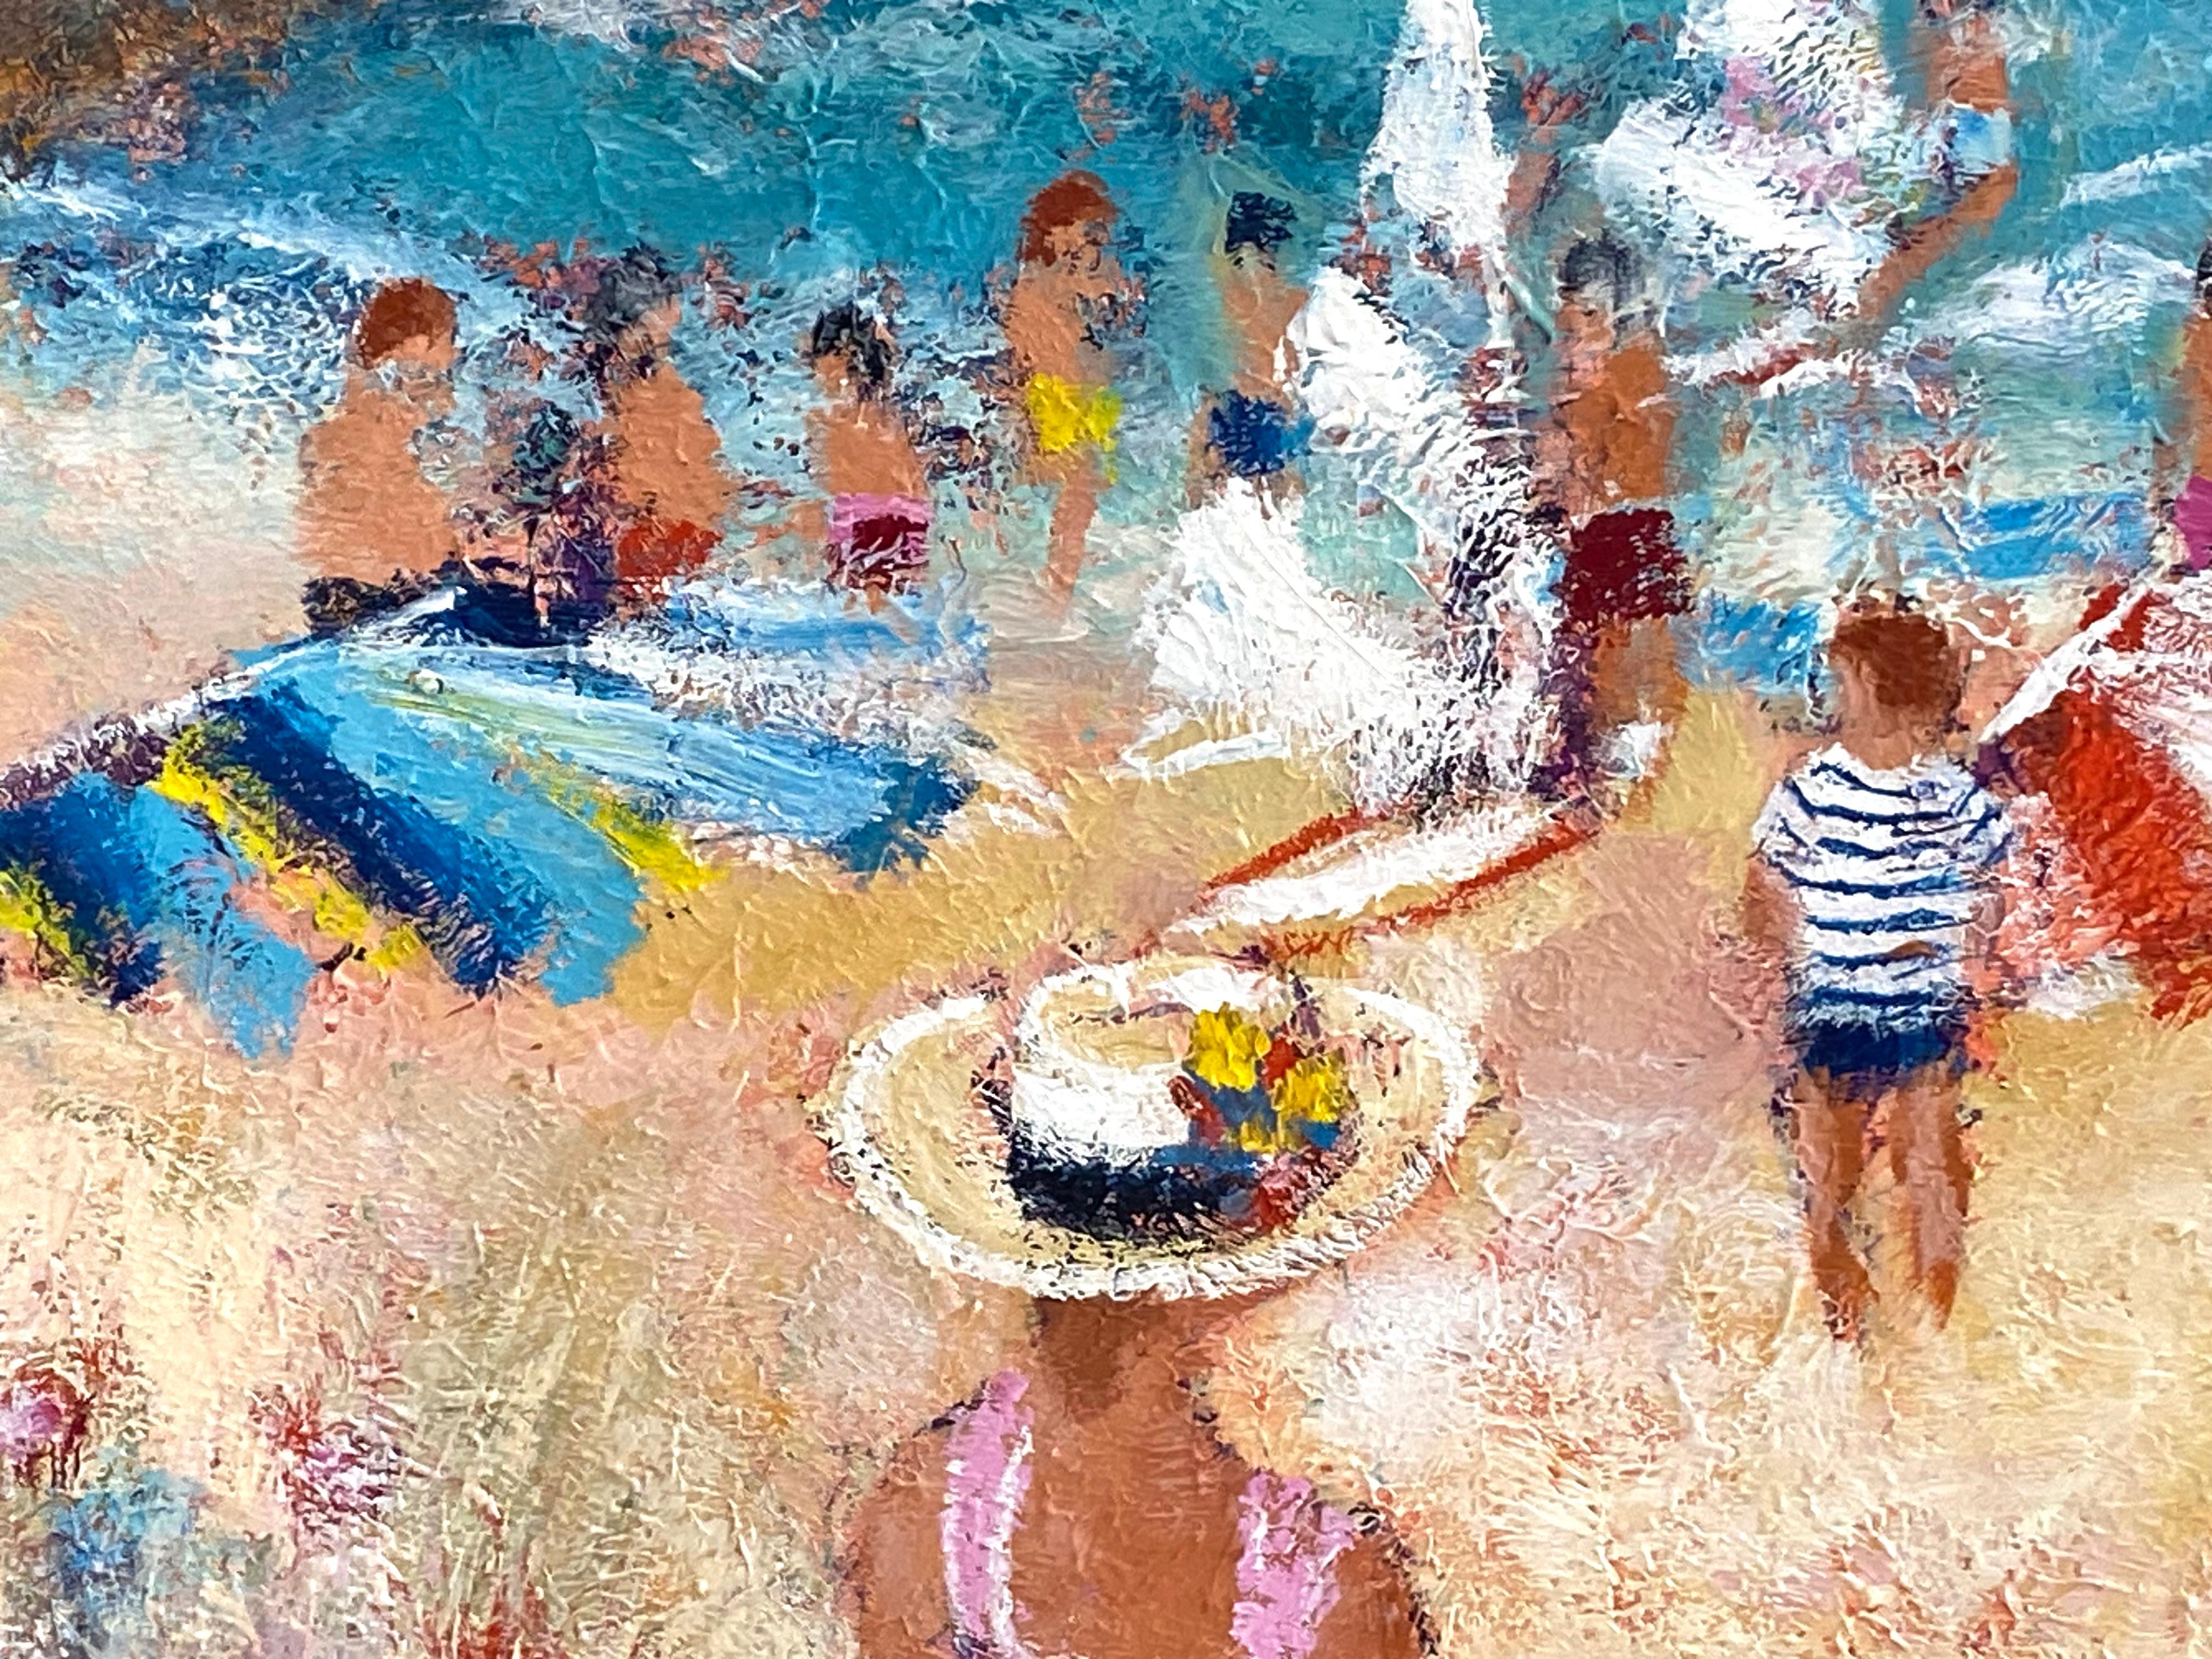 “A Day at the Beach” - Contemporary Painting by Urbain Huchet